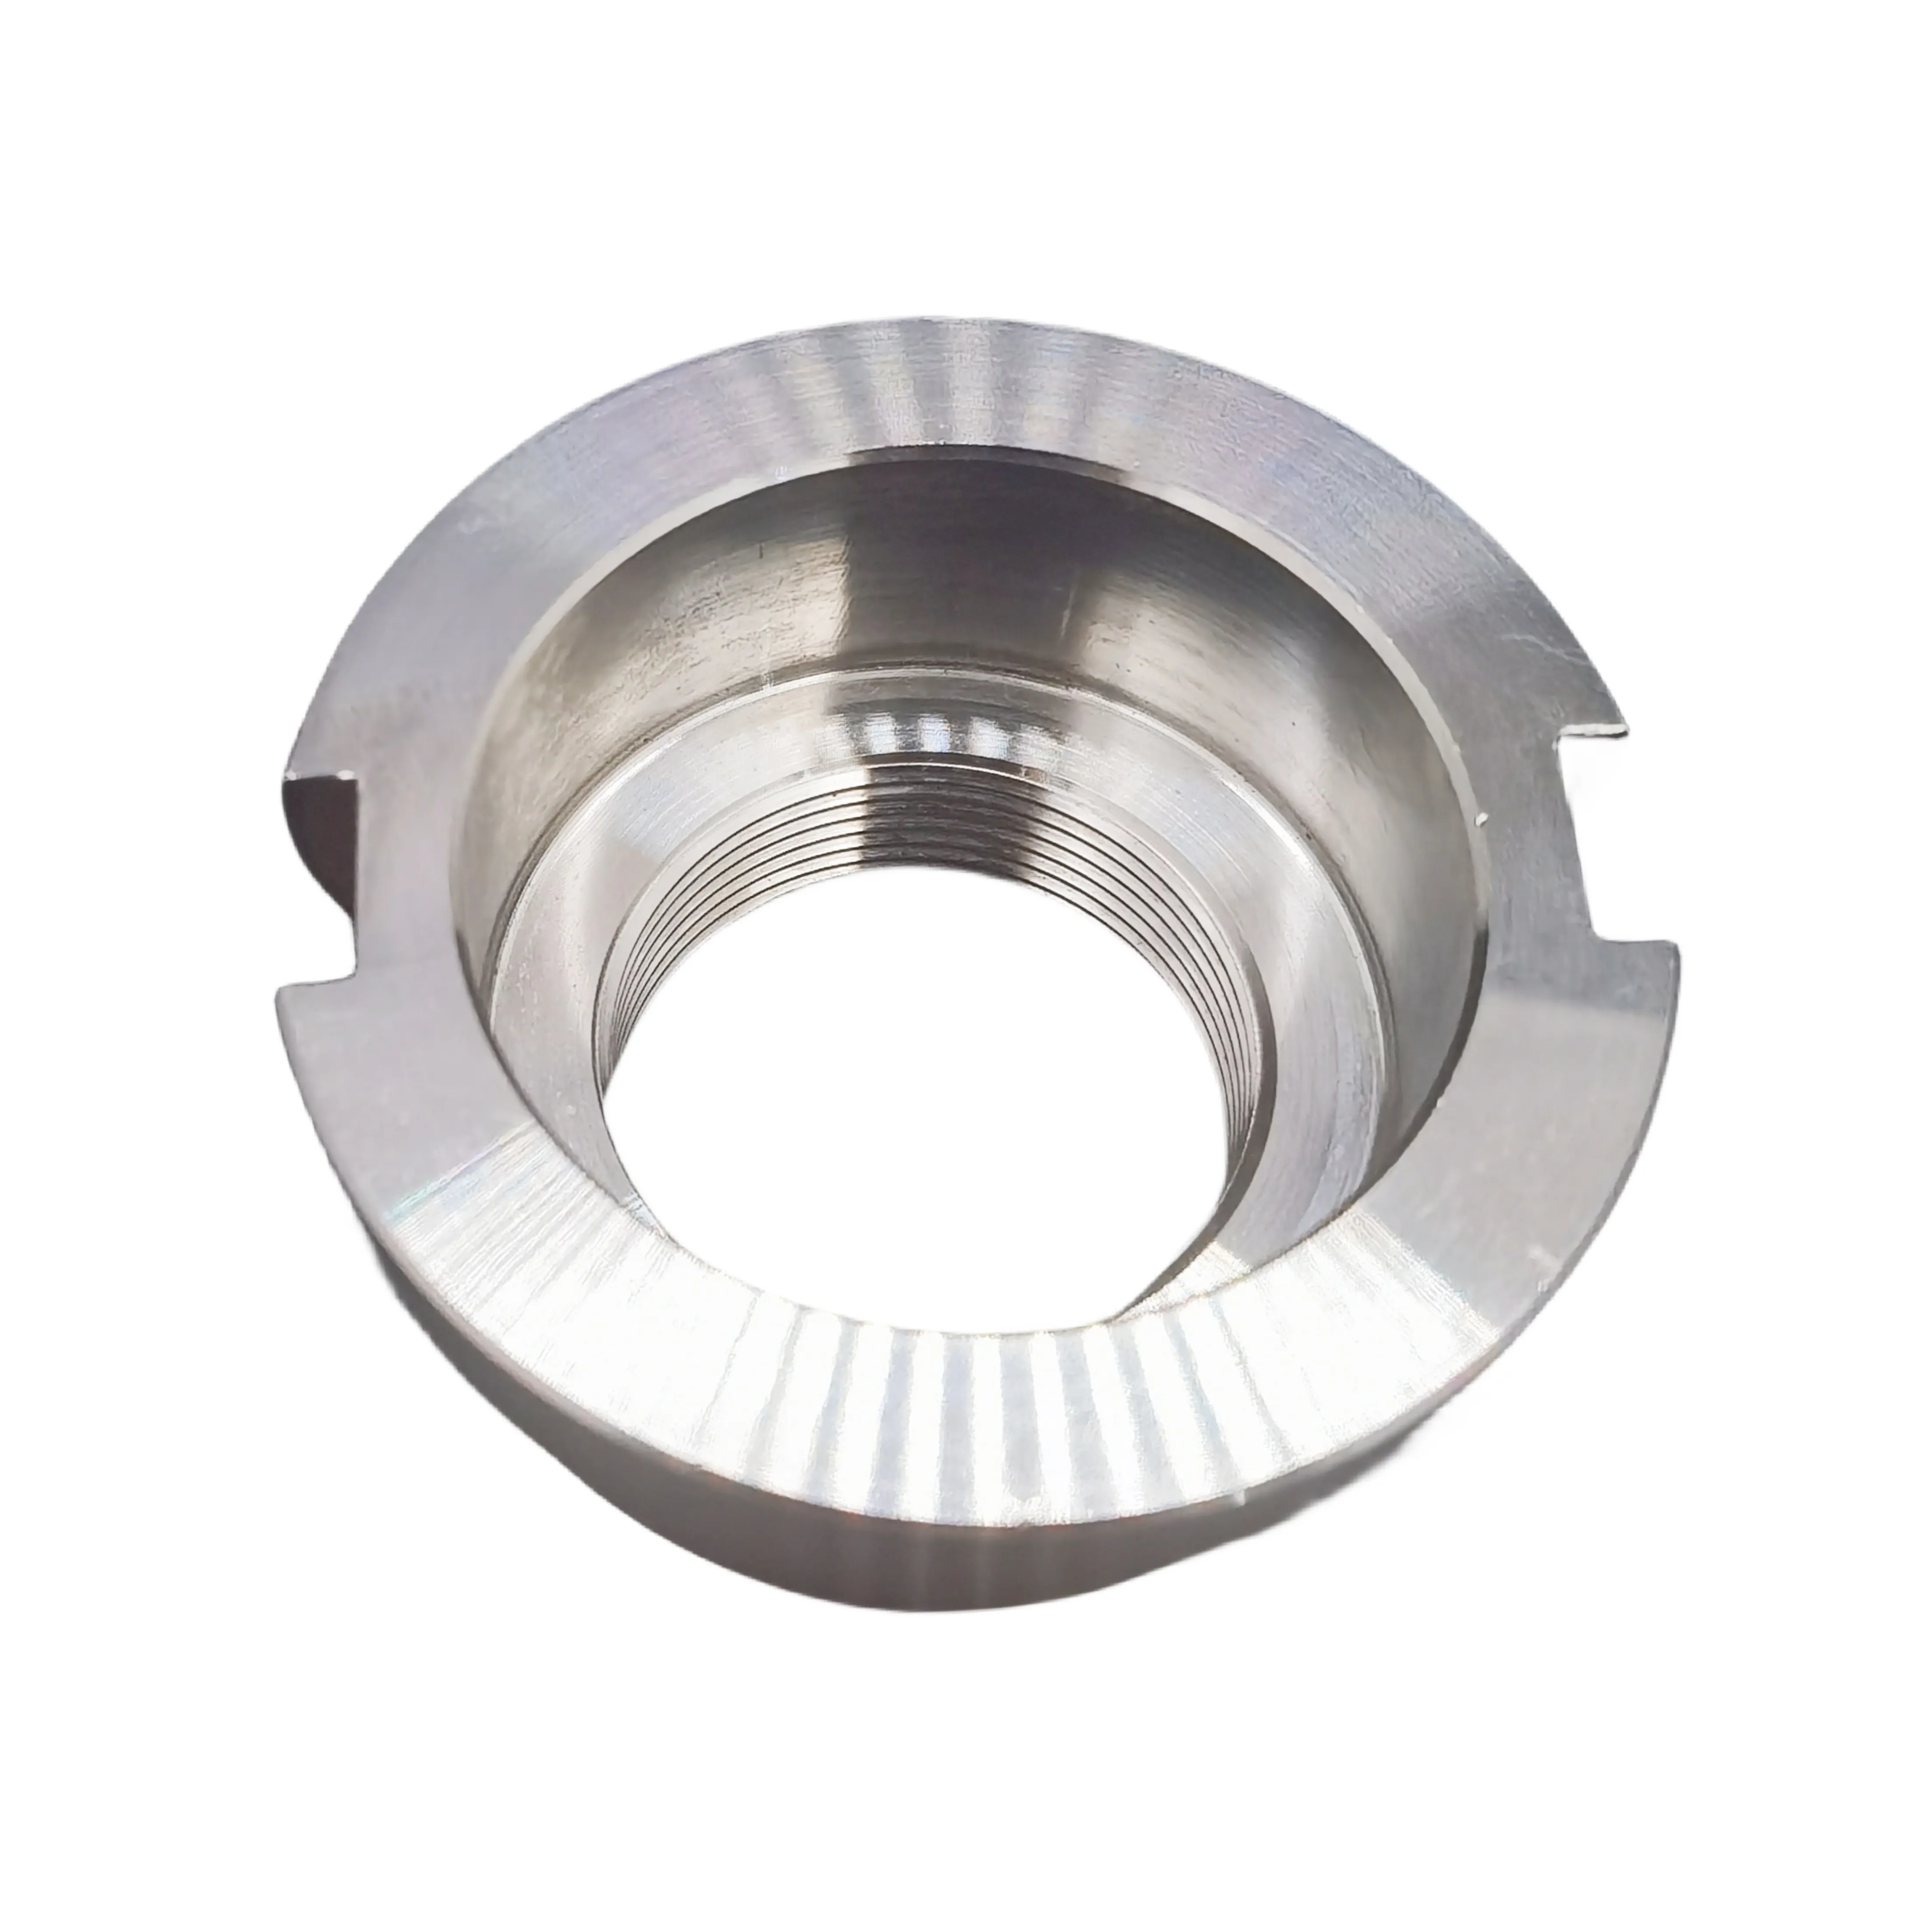 One Stop Customized Precision Slotted Round Nut Bearing Stainless Steel Cnc Machining Parts Service